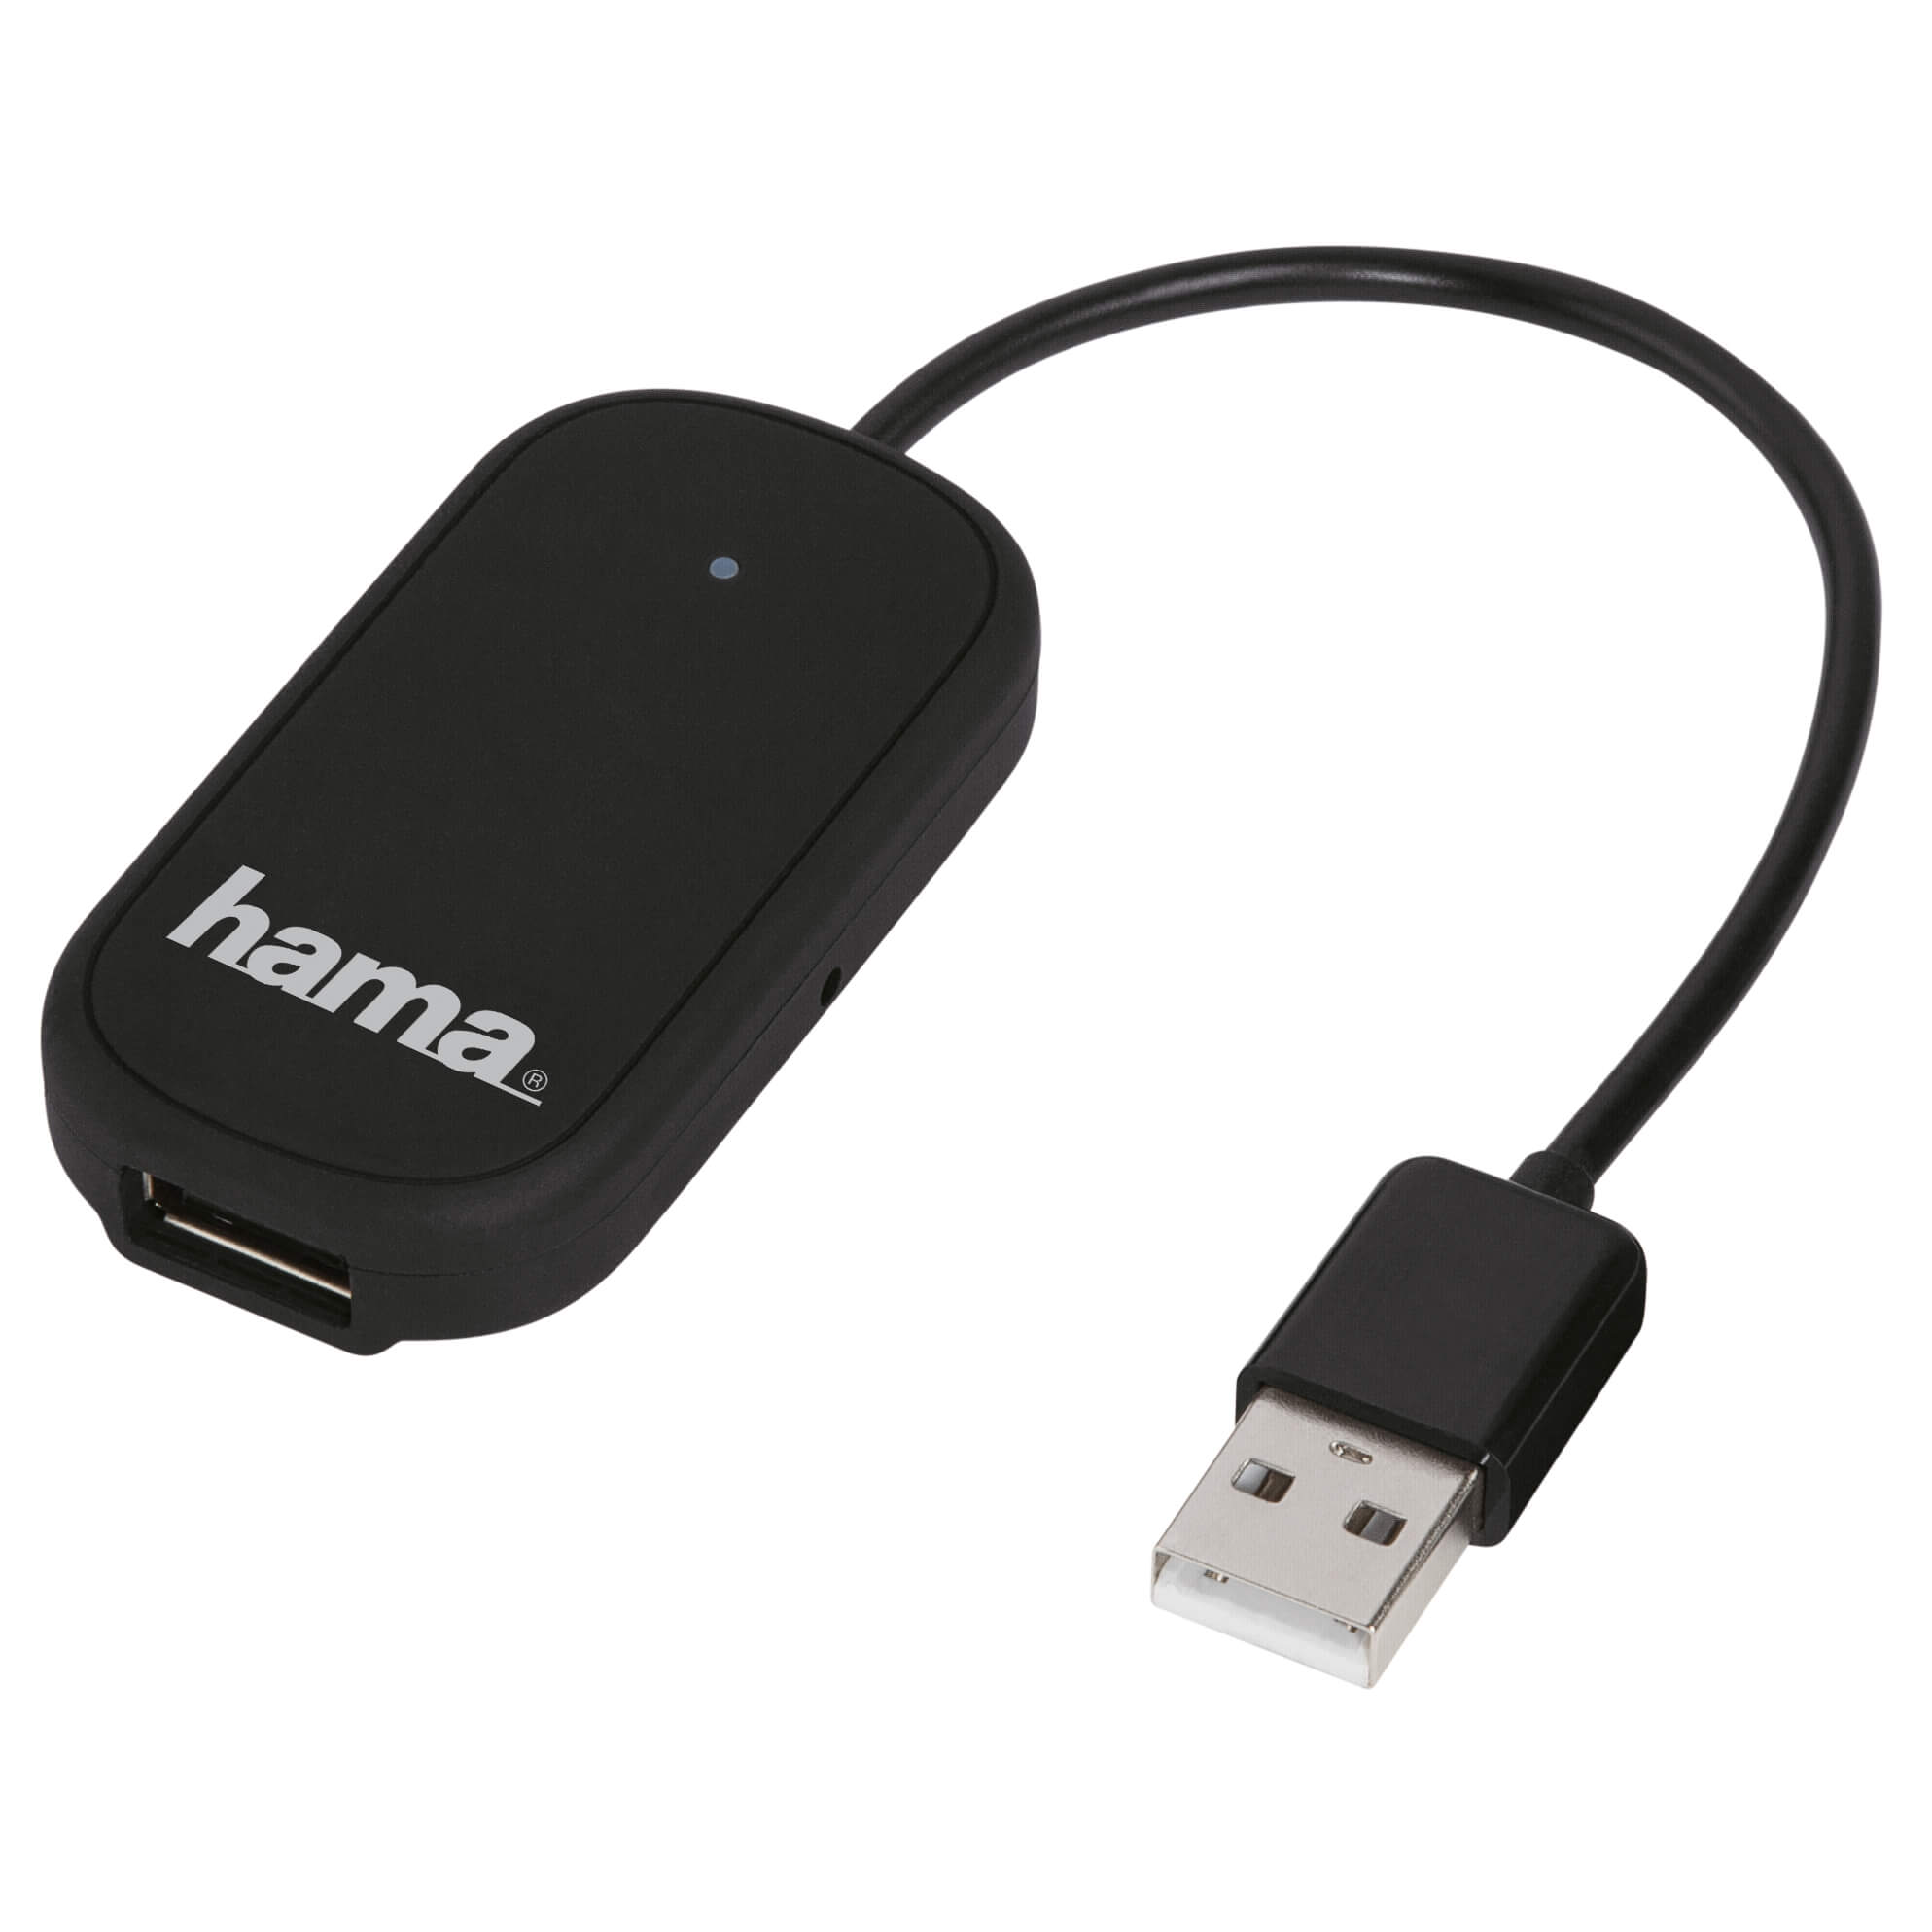 HAMA Basic Wi-Fi Data Reader, USB, for Smartphone and Tablet PC